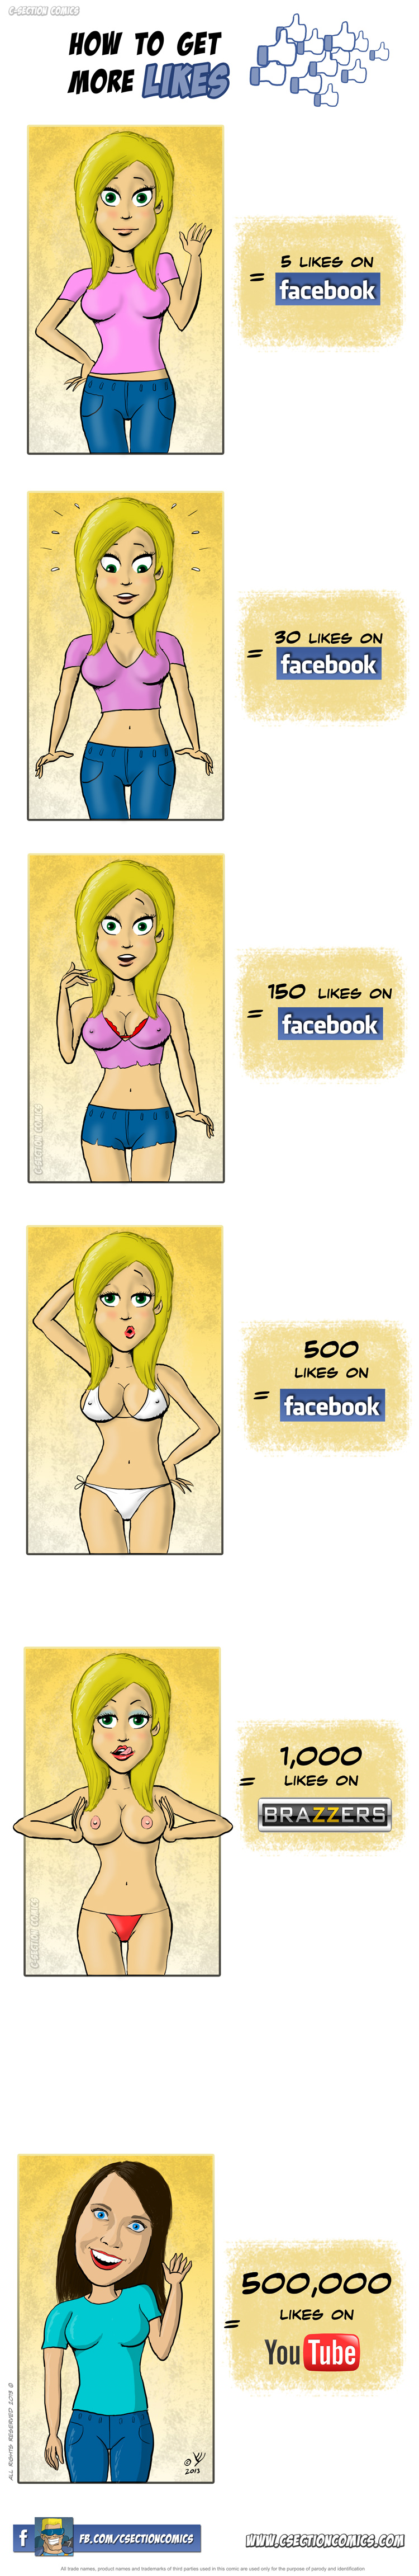 How to Get More Likes - by C-Section Comics